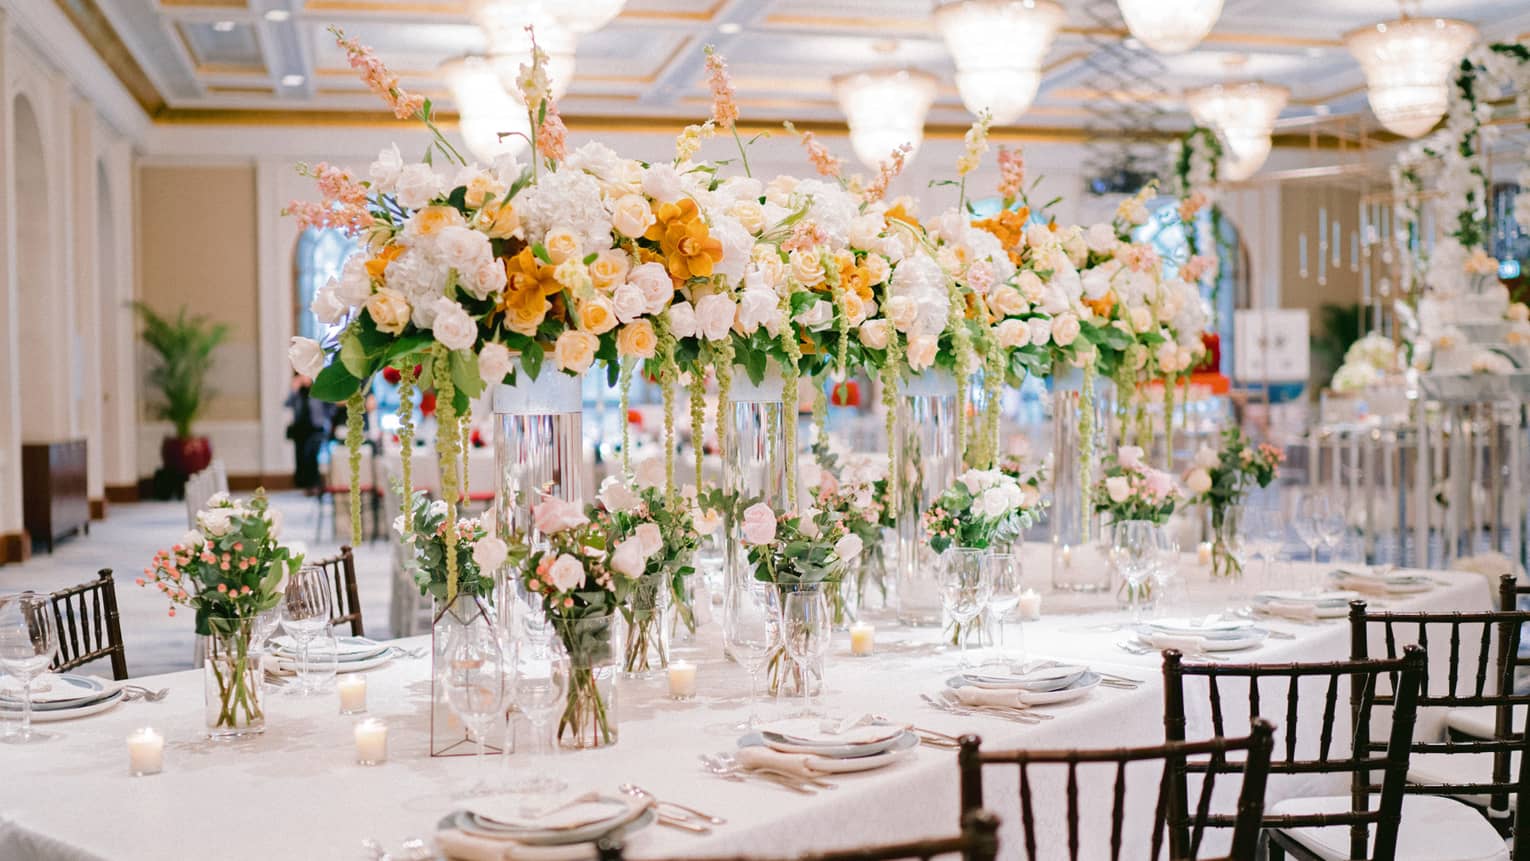 White, pink and orange roses in vases on wedding banquet dining table